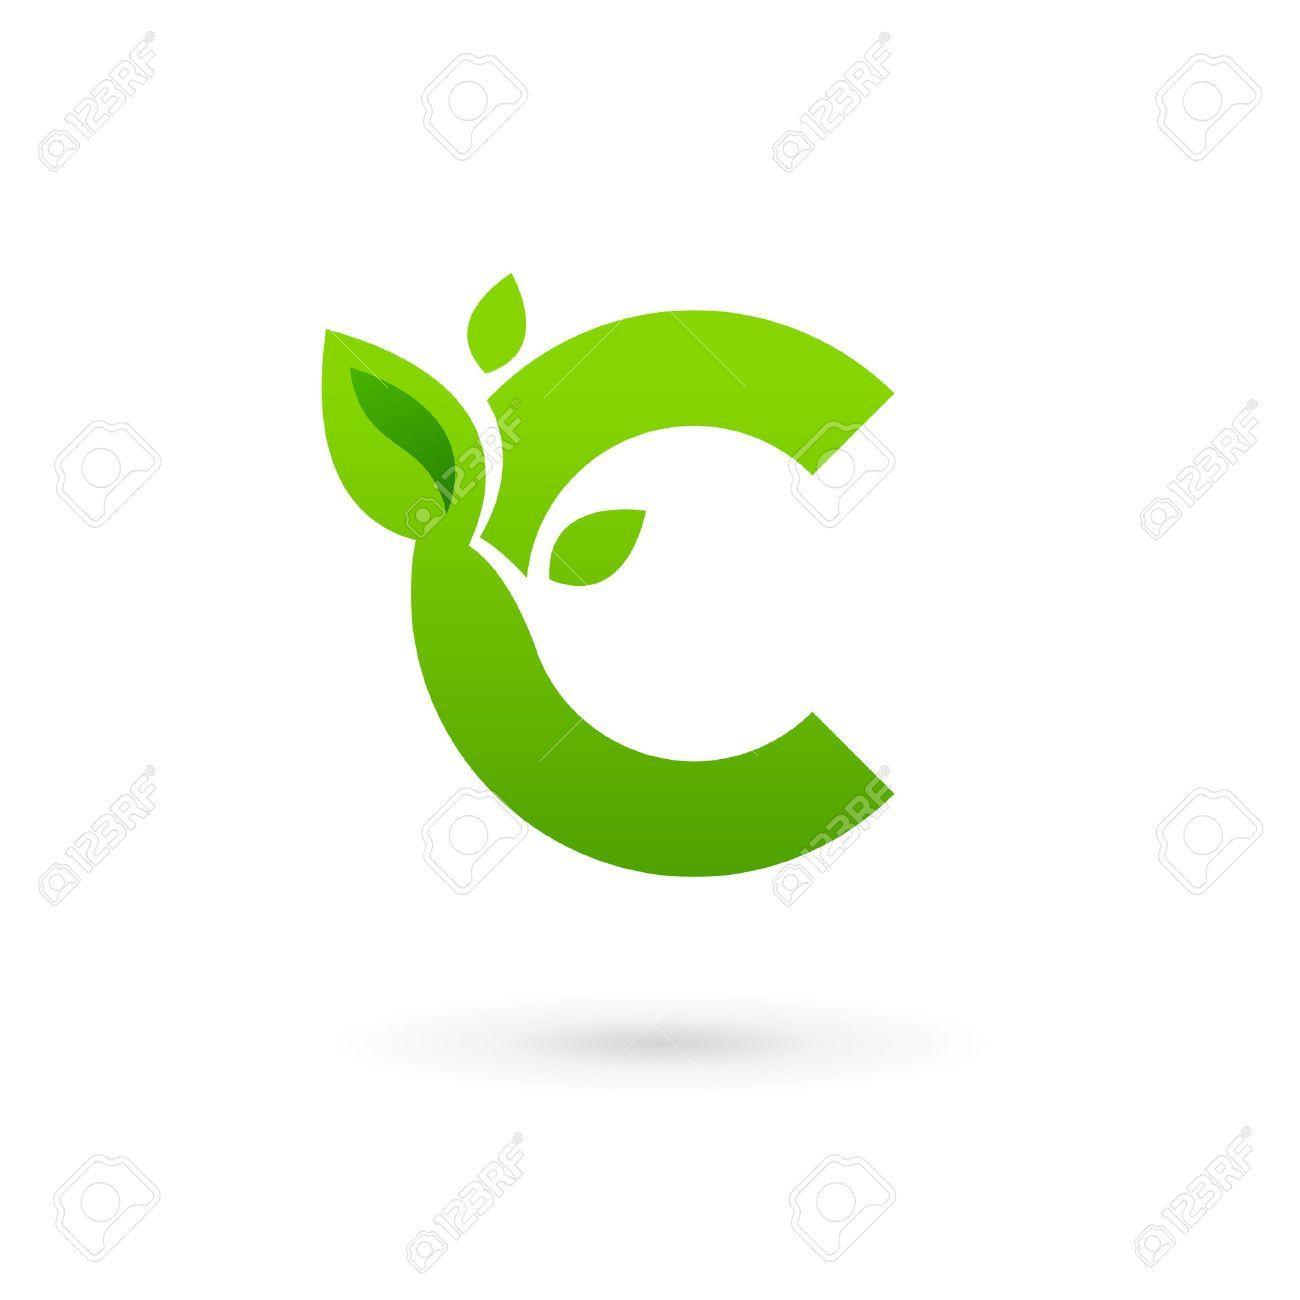 Cool Green Letter a Logo - Letter C eco leaves logo icon design template elements. Vector